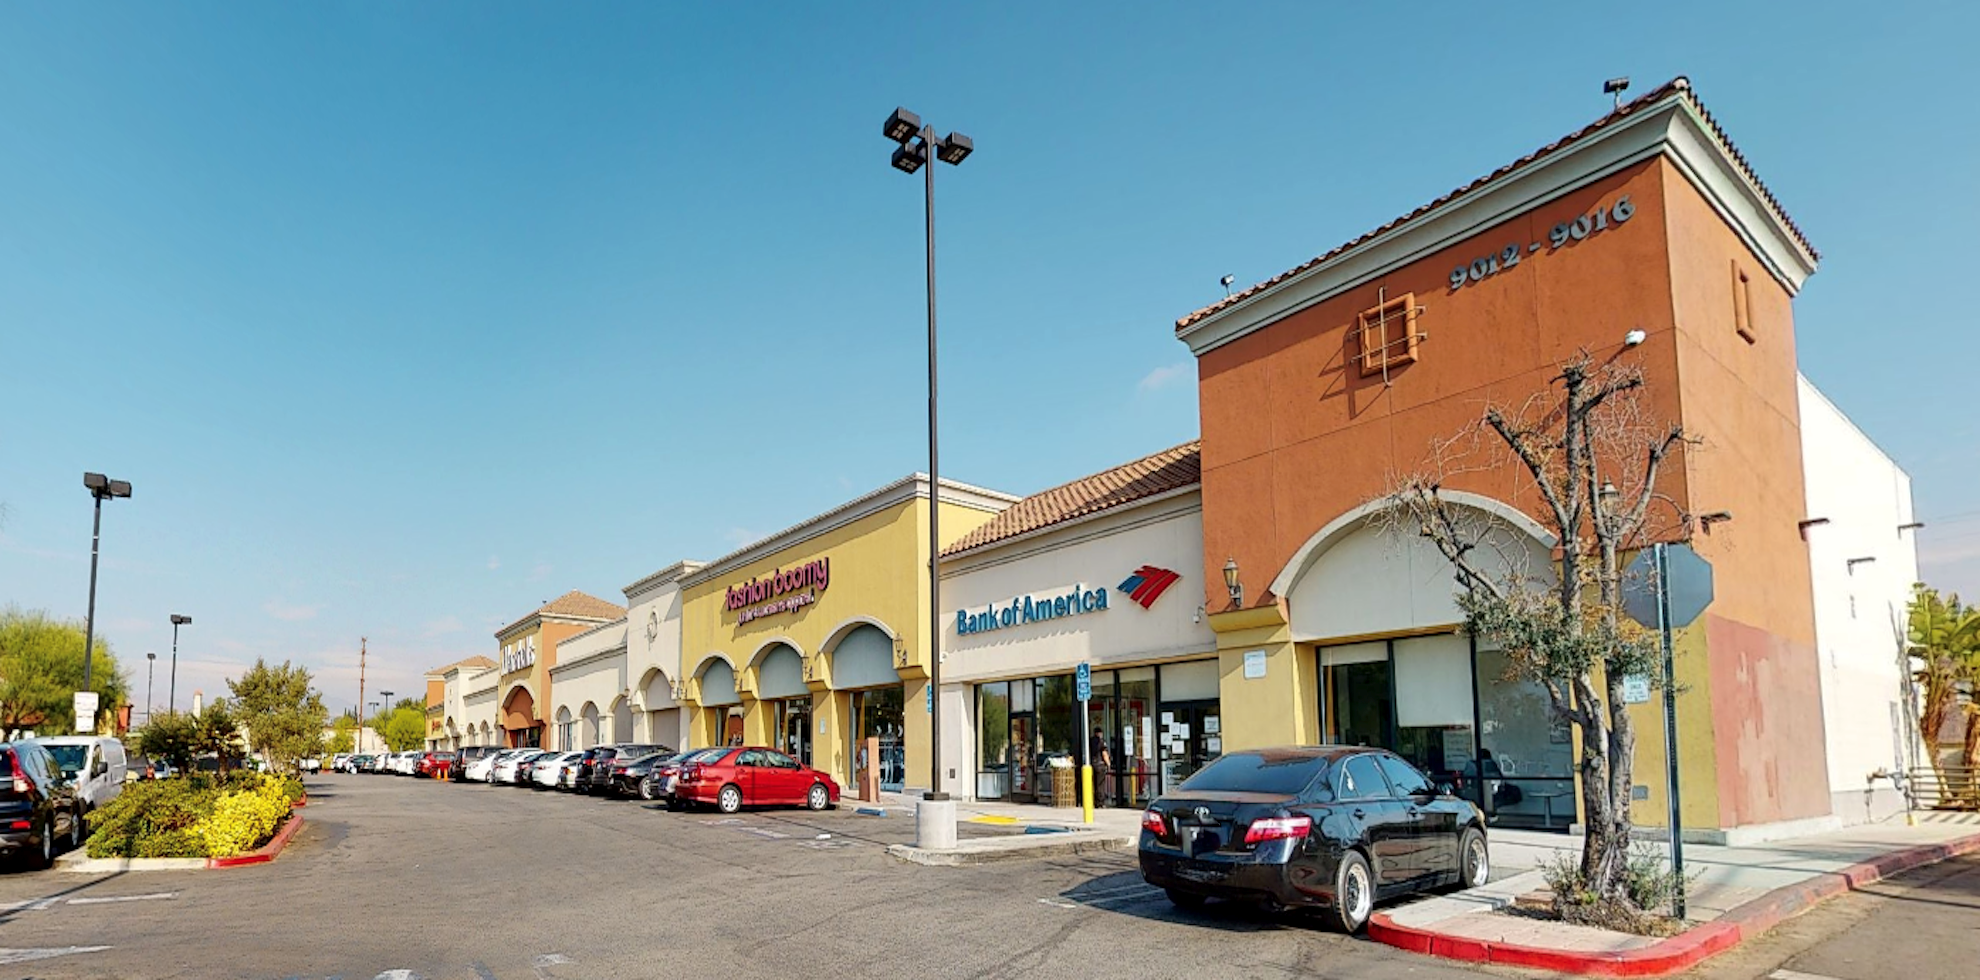 Bank of America financial center with walk-up ATM | 9012 Sepulveda Blvd, North Hills, CA 91343